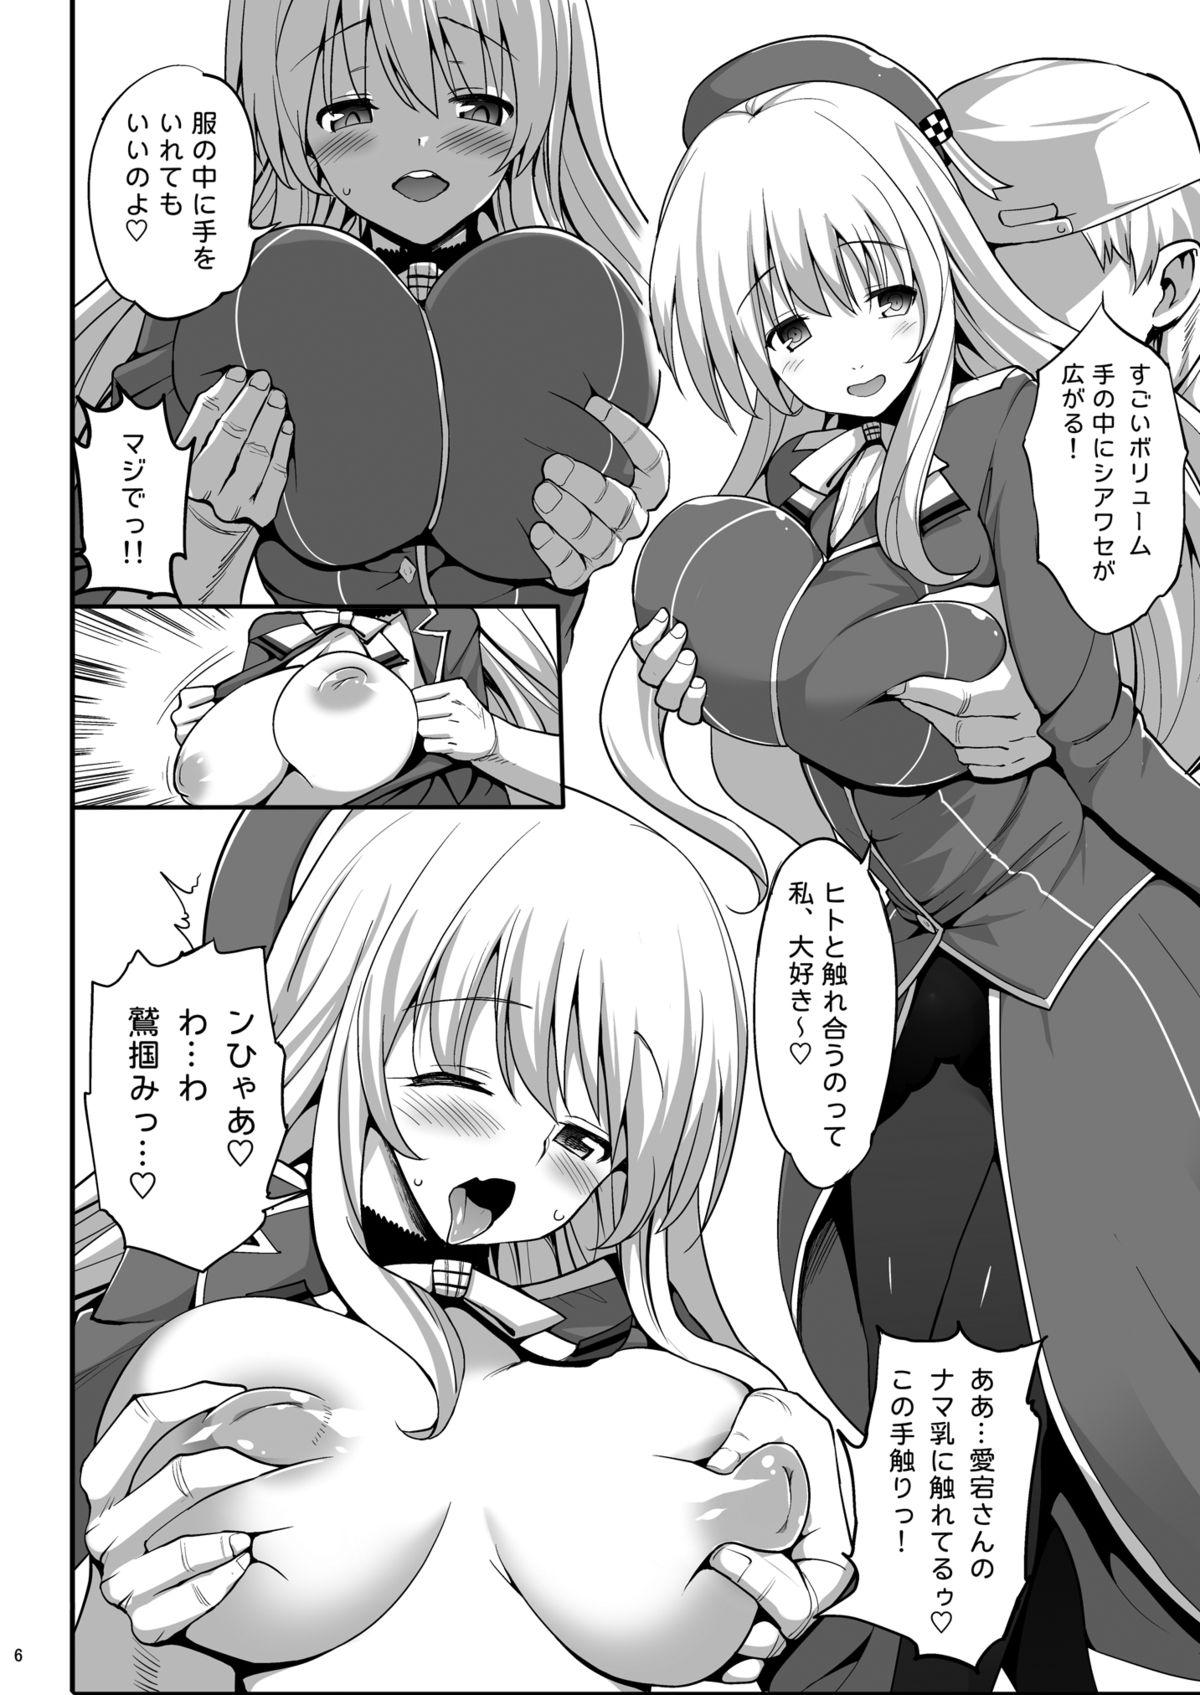 Blows 神乳愛宕 ビッチ乱交 - Kantai collection Black Woman - Page 32